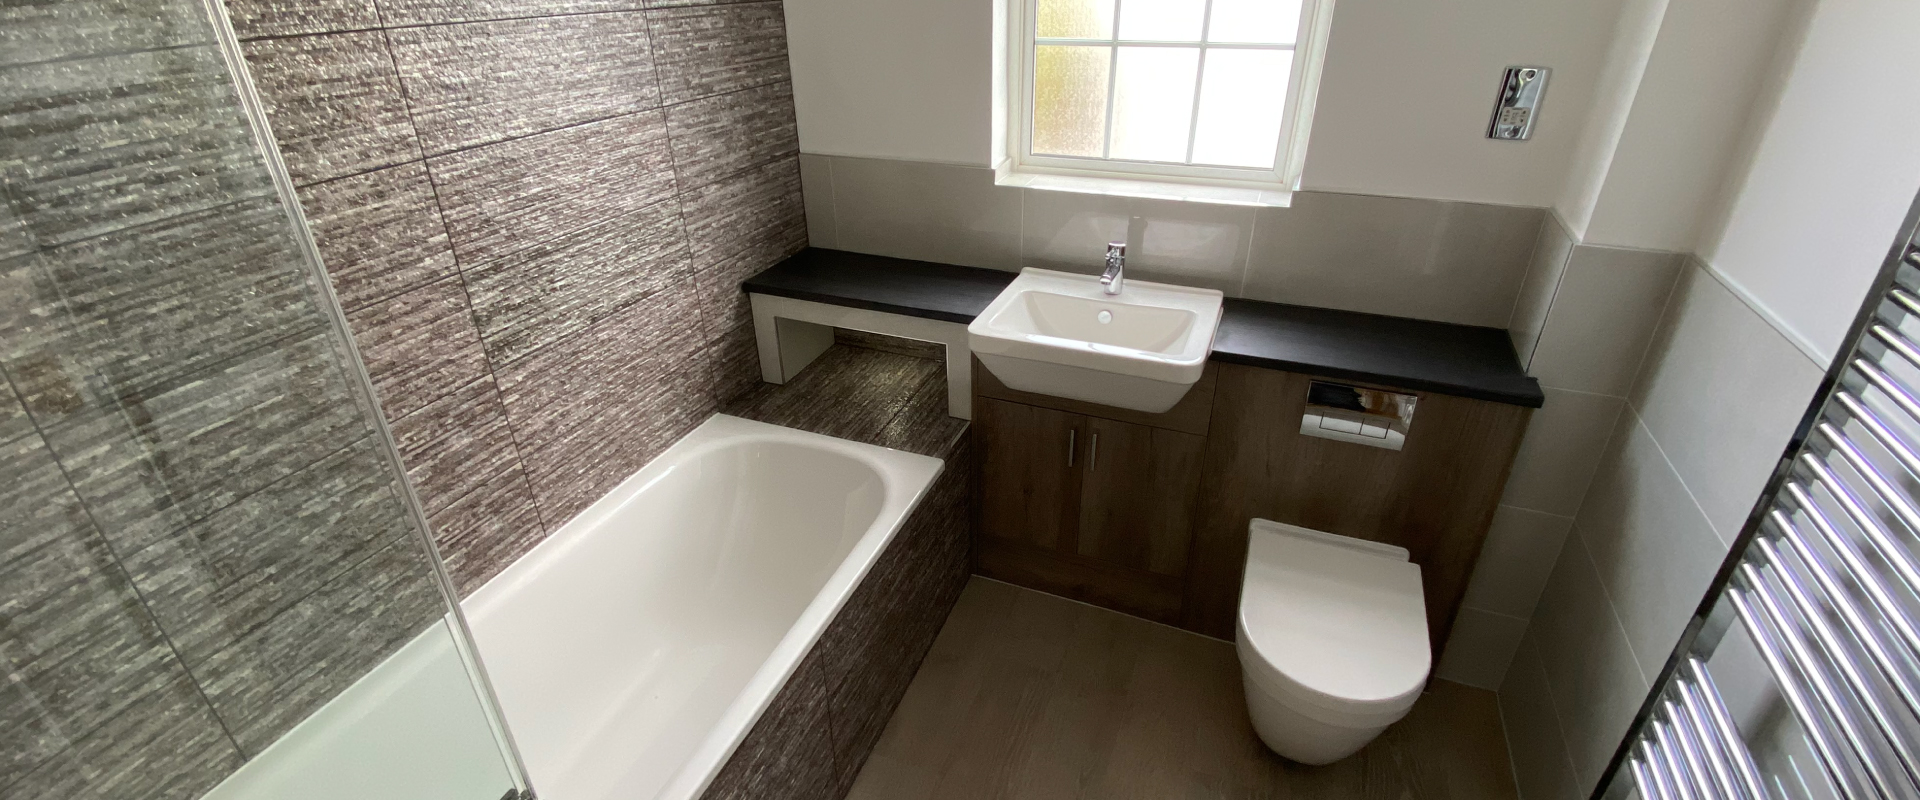 bathroom installers in High Wycombe